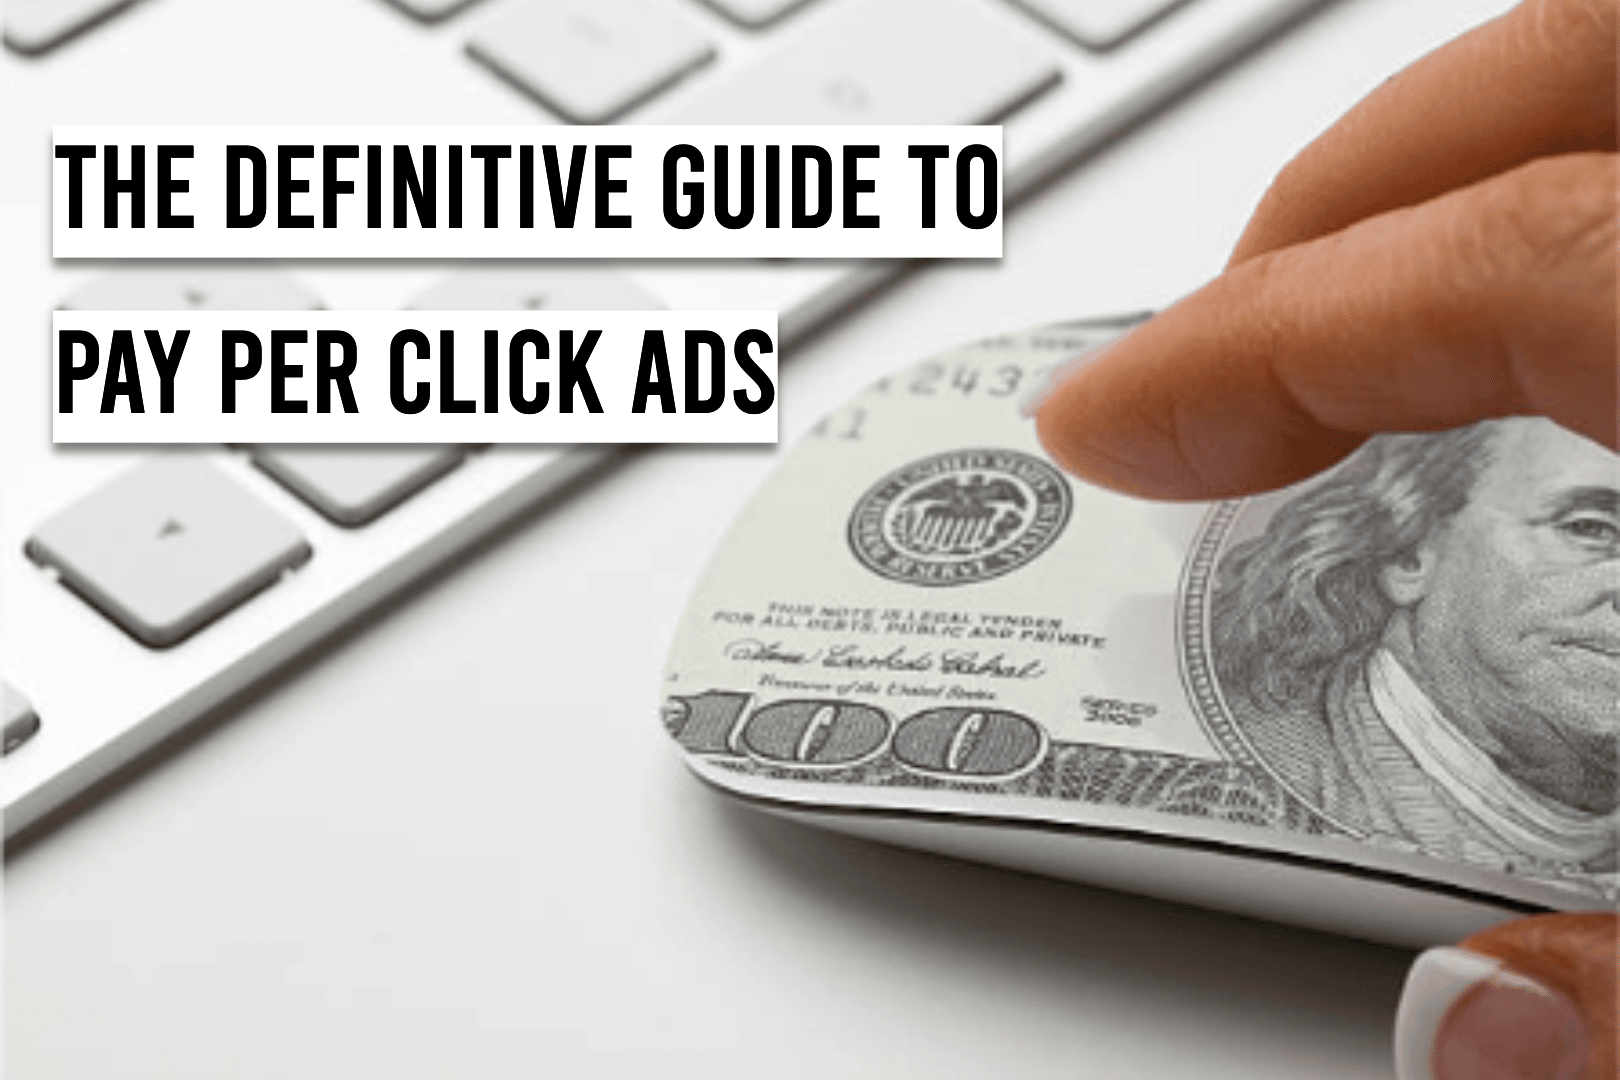 The Definitive Guide to Pay Per Click Ads